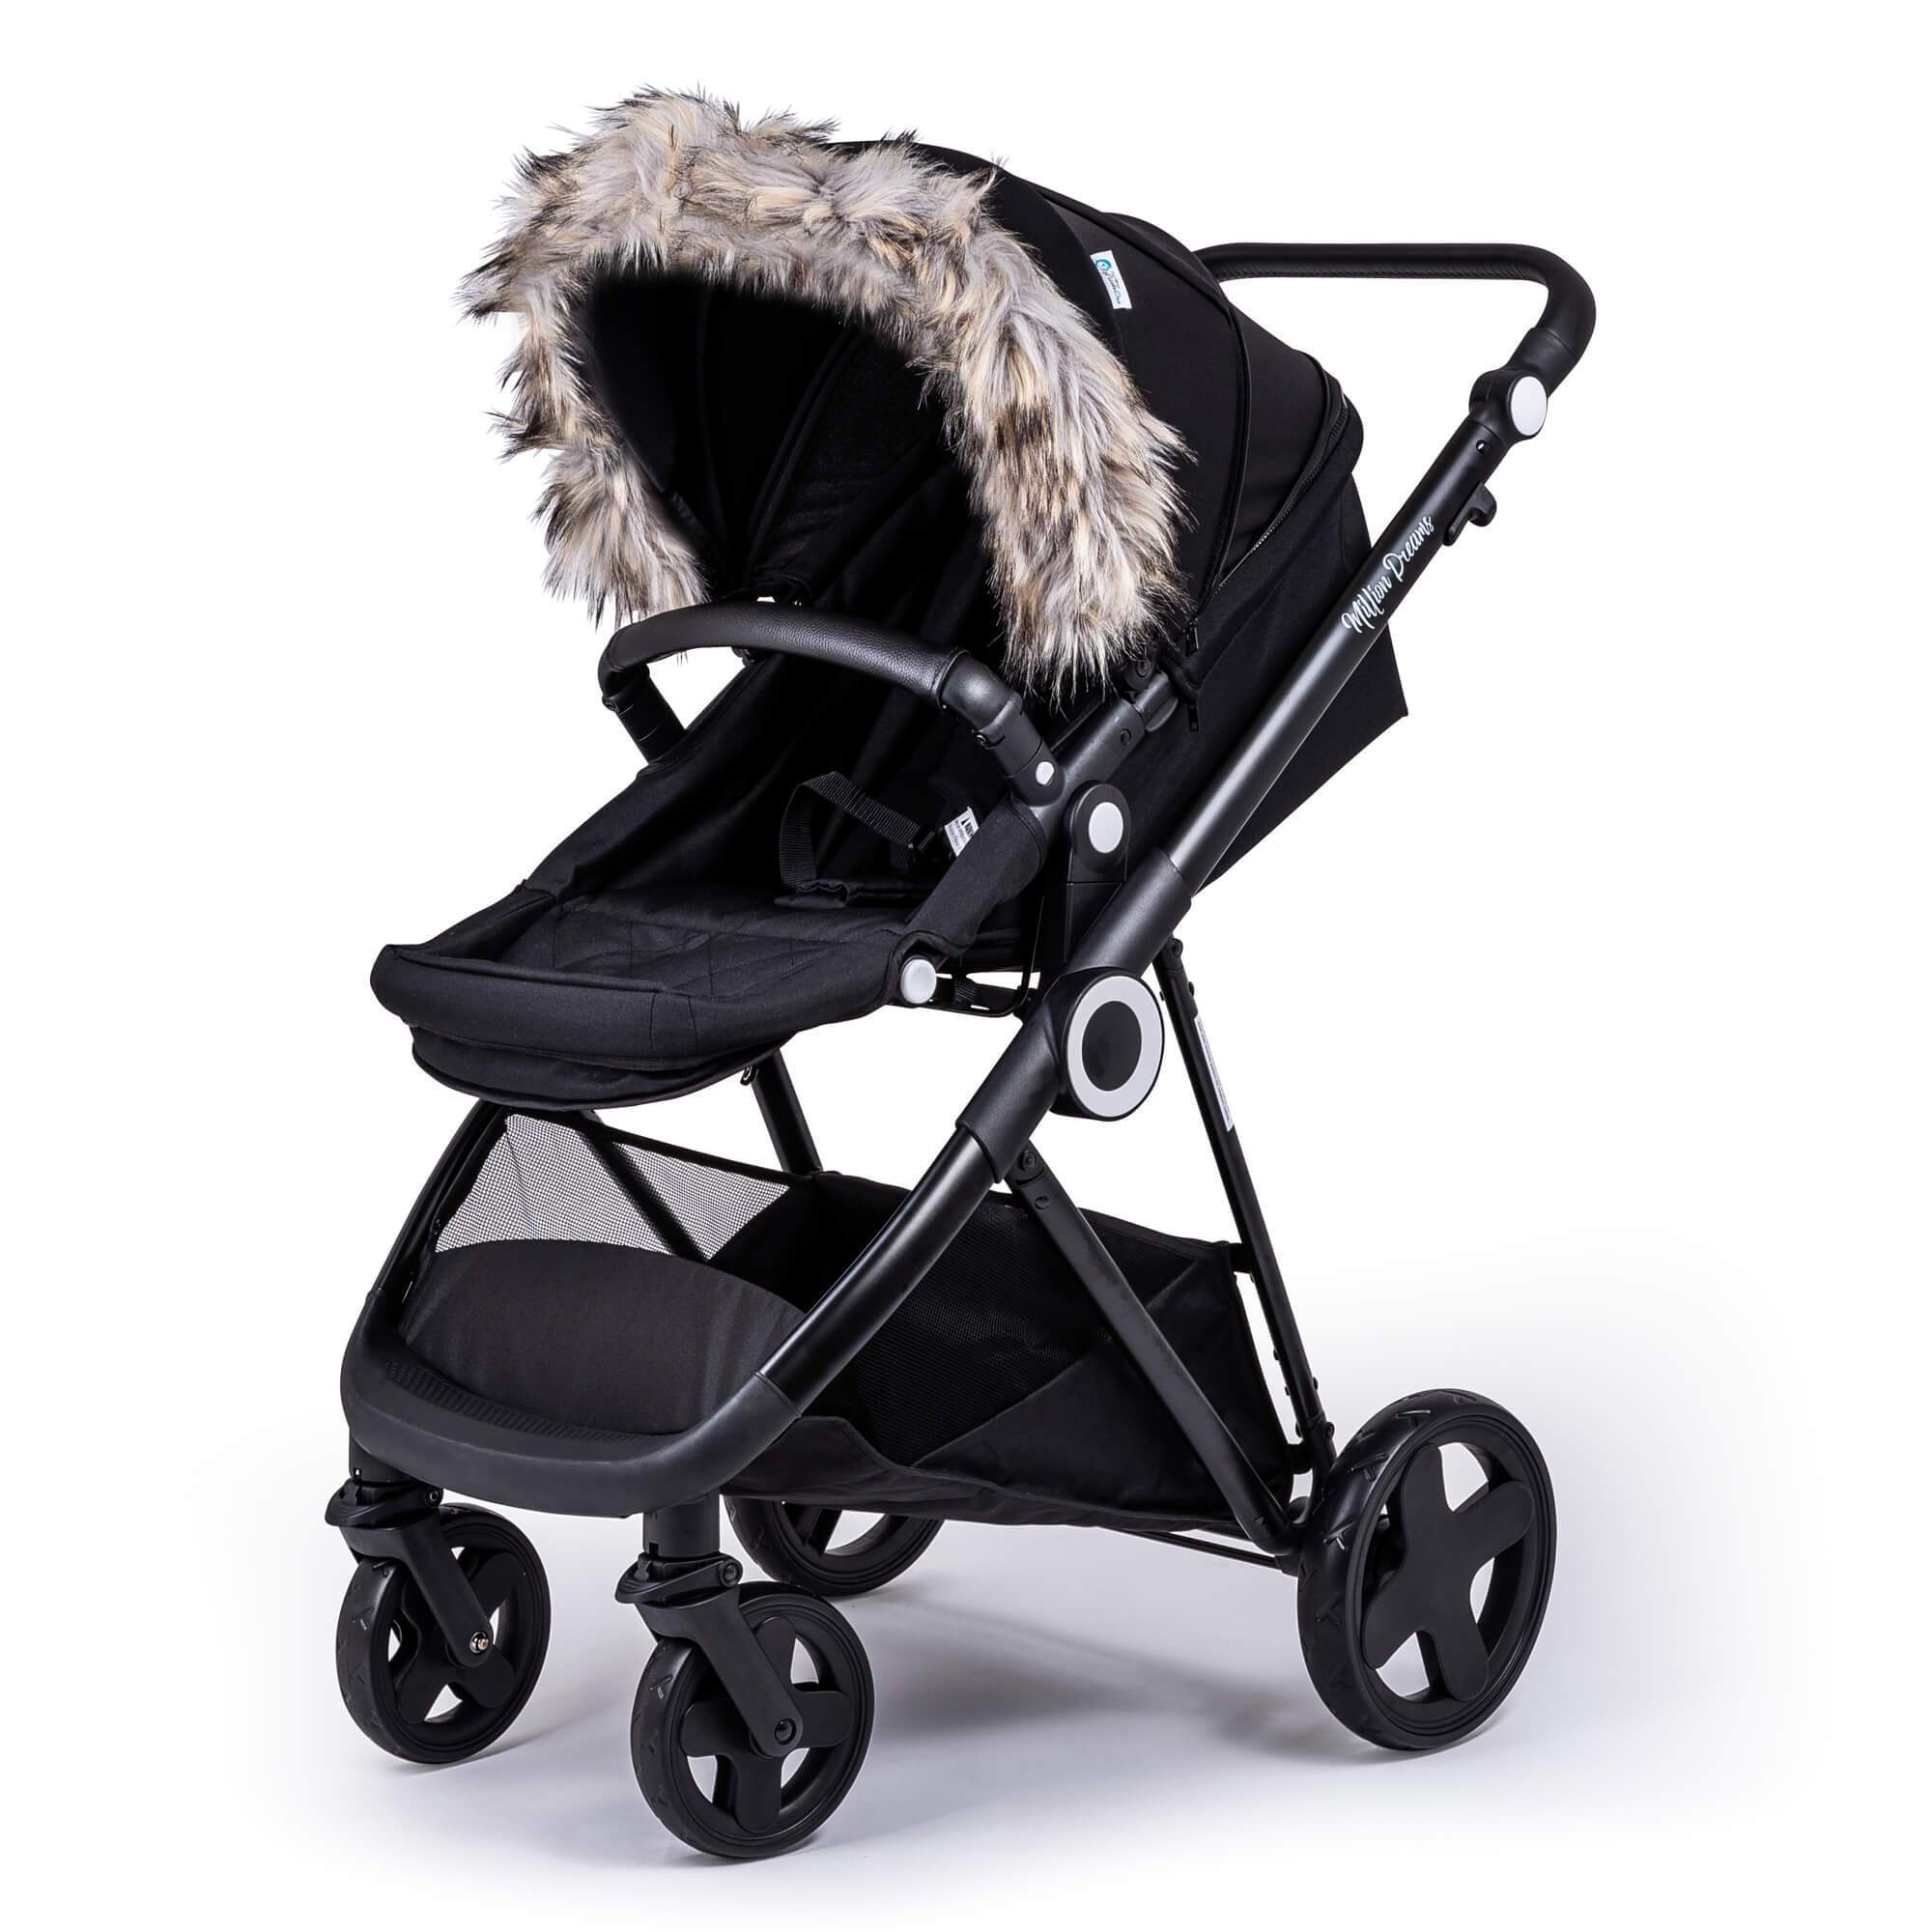 Pram Fur Hood Trim Attachment for Pushchair Compatible with Kiddicare - Light Grey / Fits All Models | For Your Little One